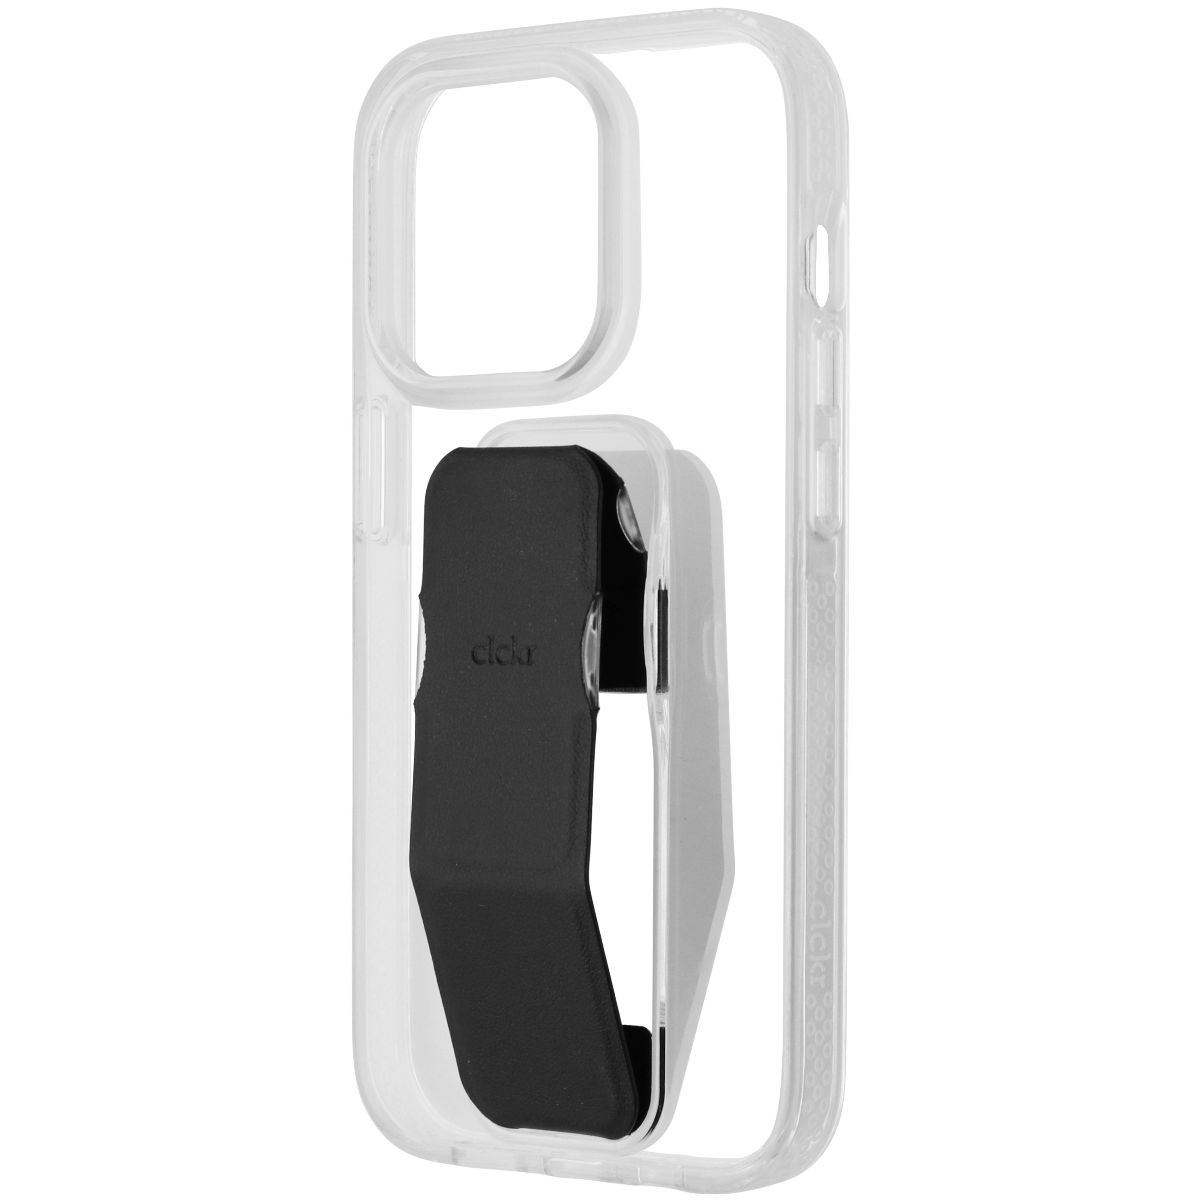 CLCKR Stand & Grip Case For Apple IPhone 13 Pro Smartphone - Clear/Black